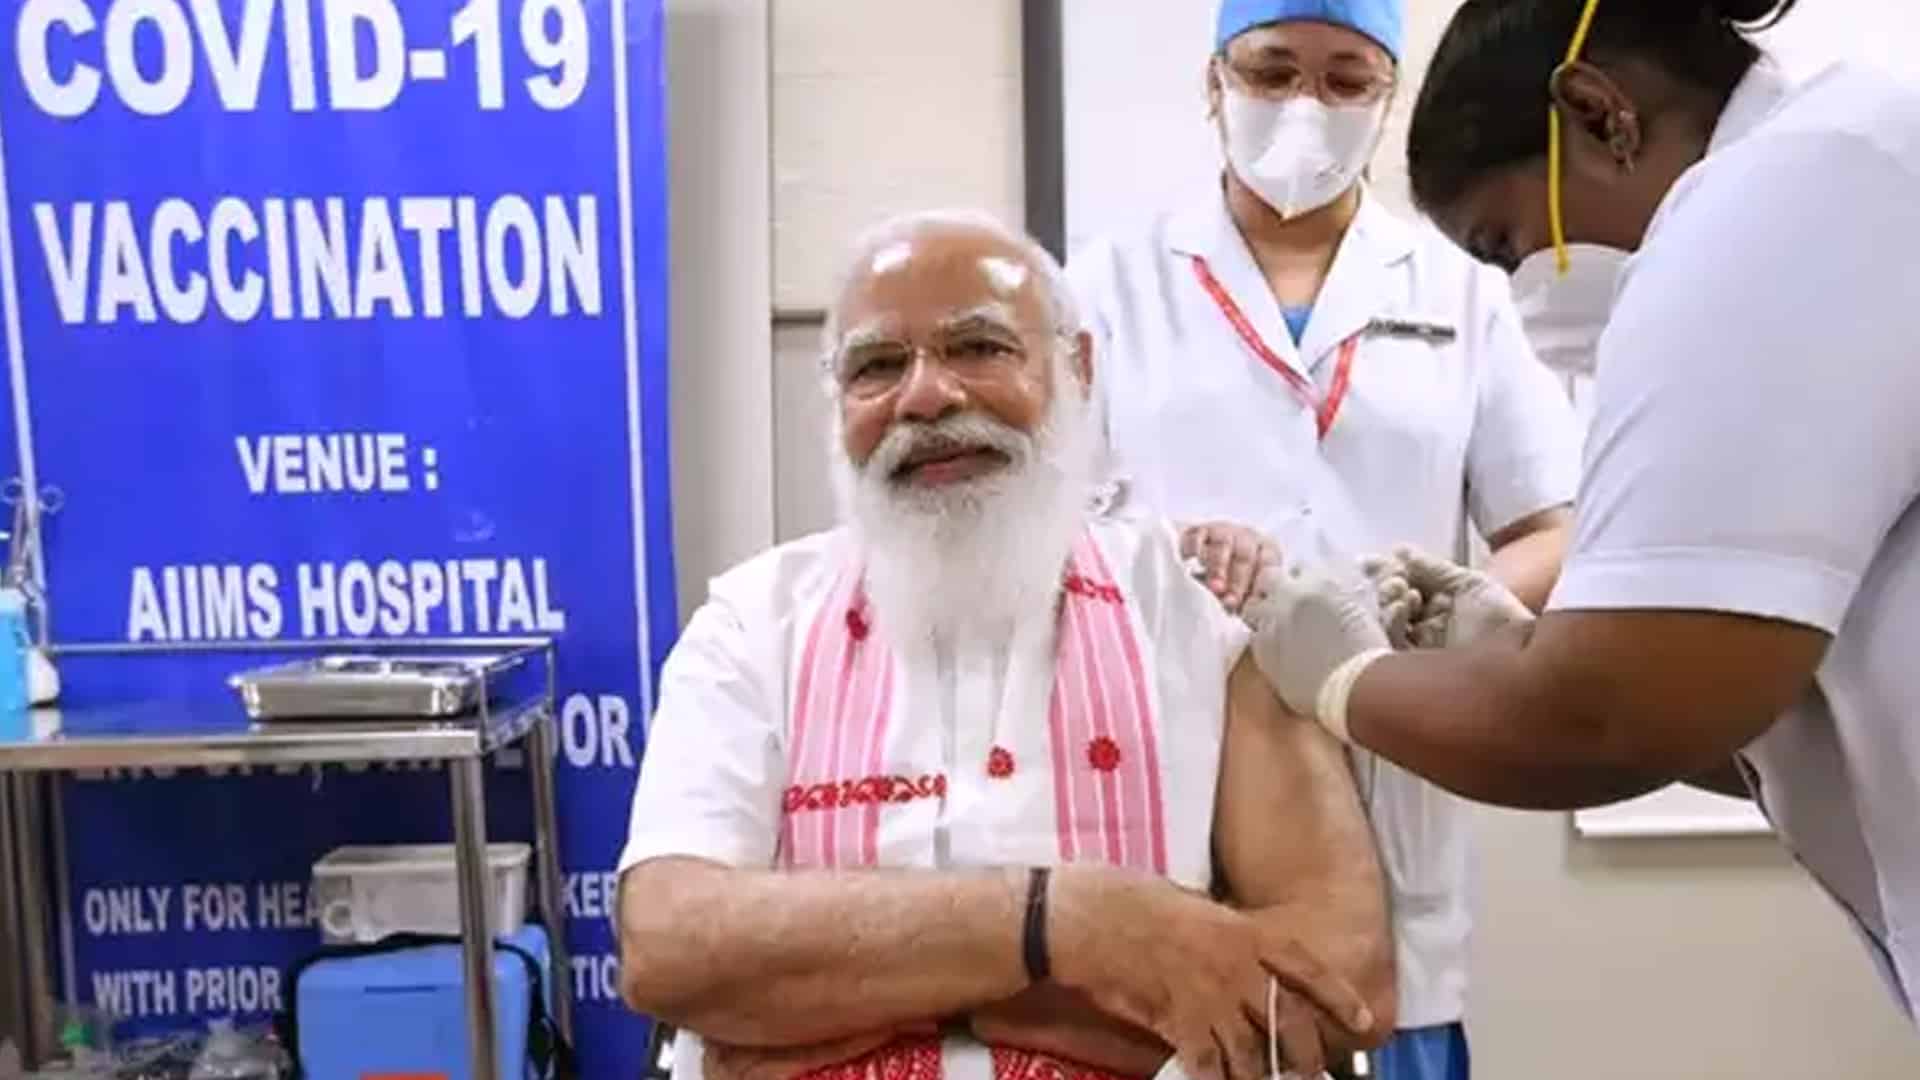 PM Modi taking COVID vax to build confidence in vaccination drive: Bharat Biotech